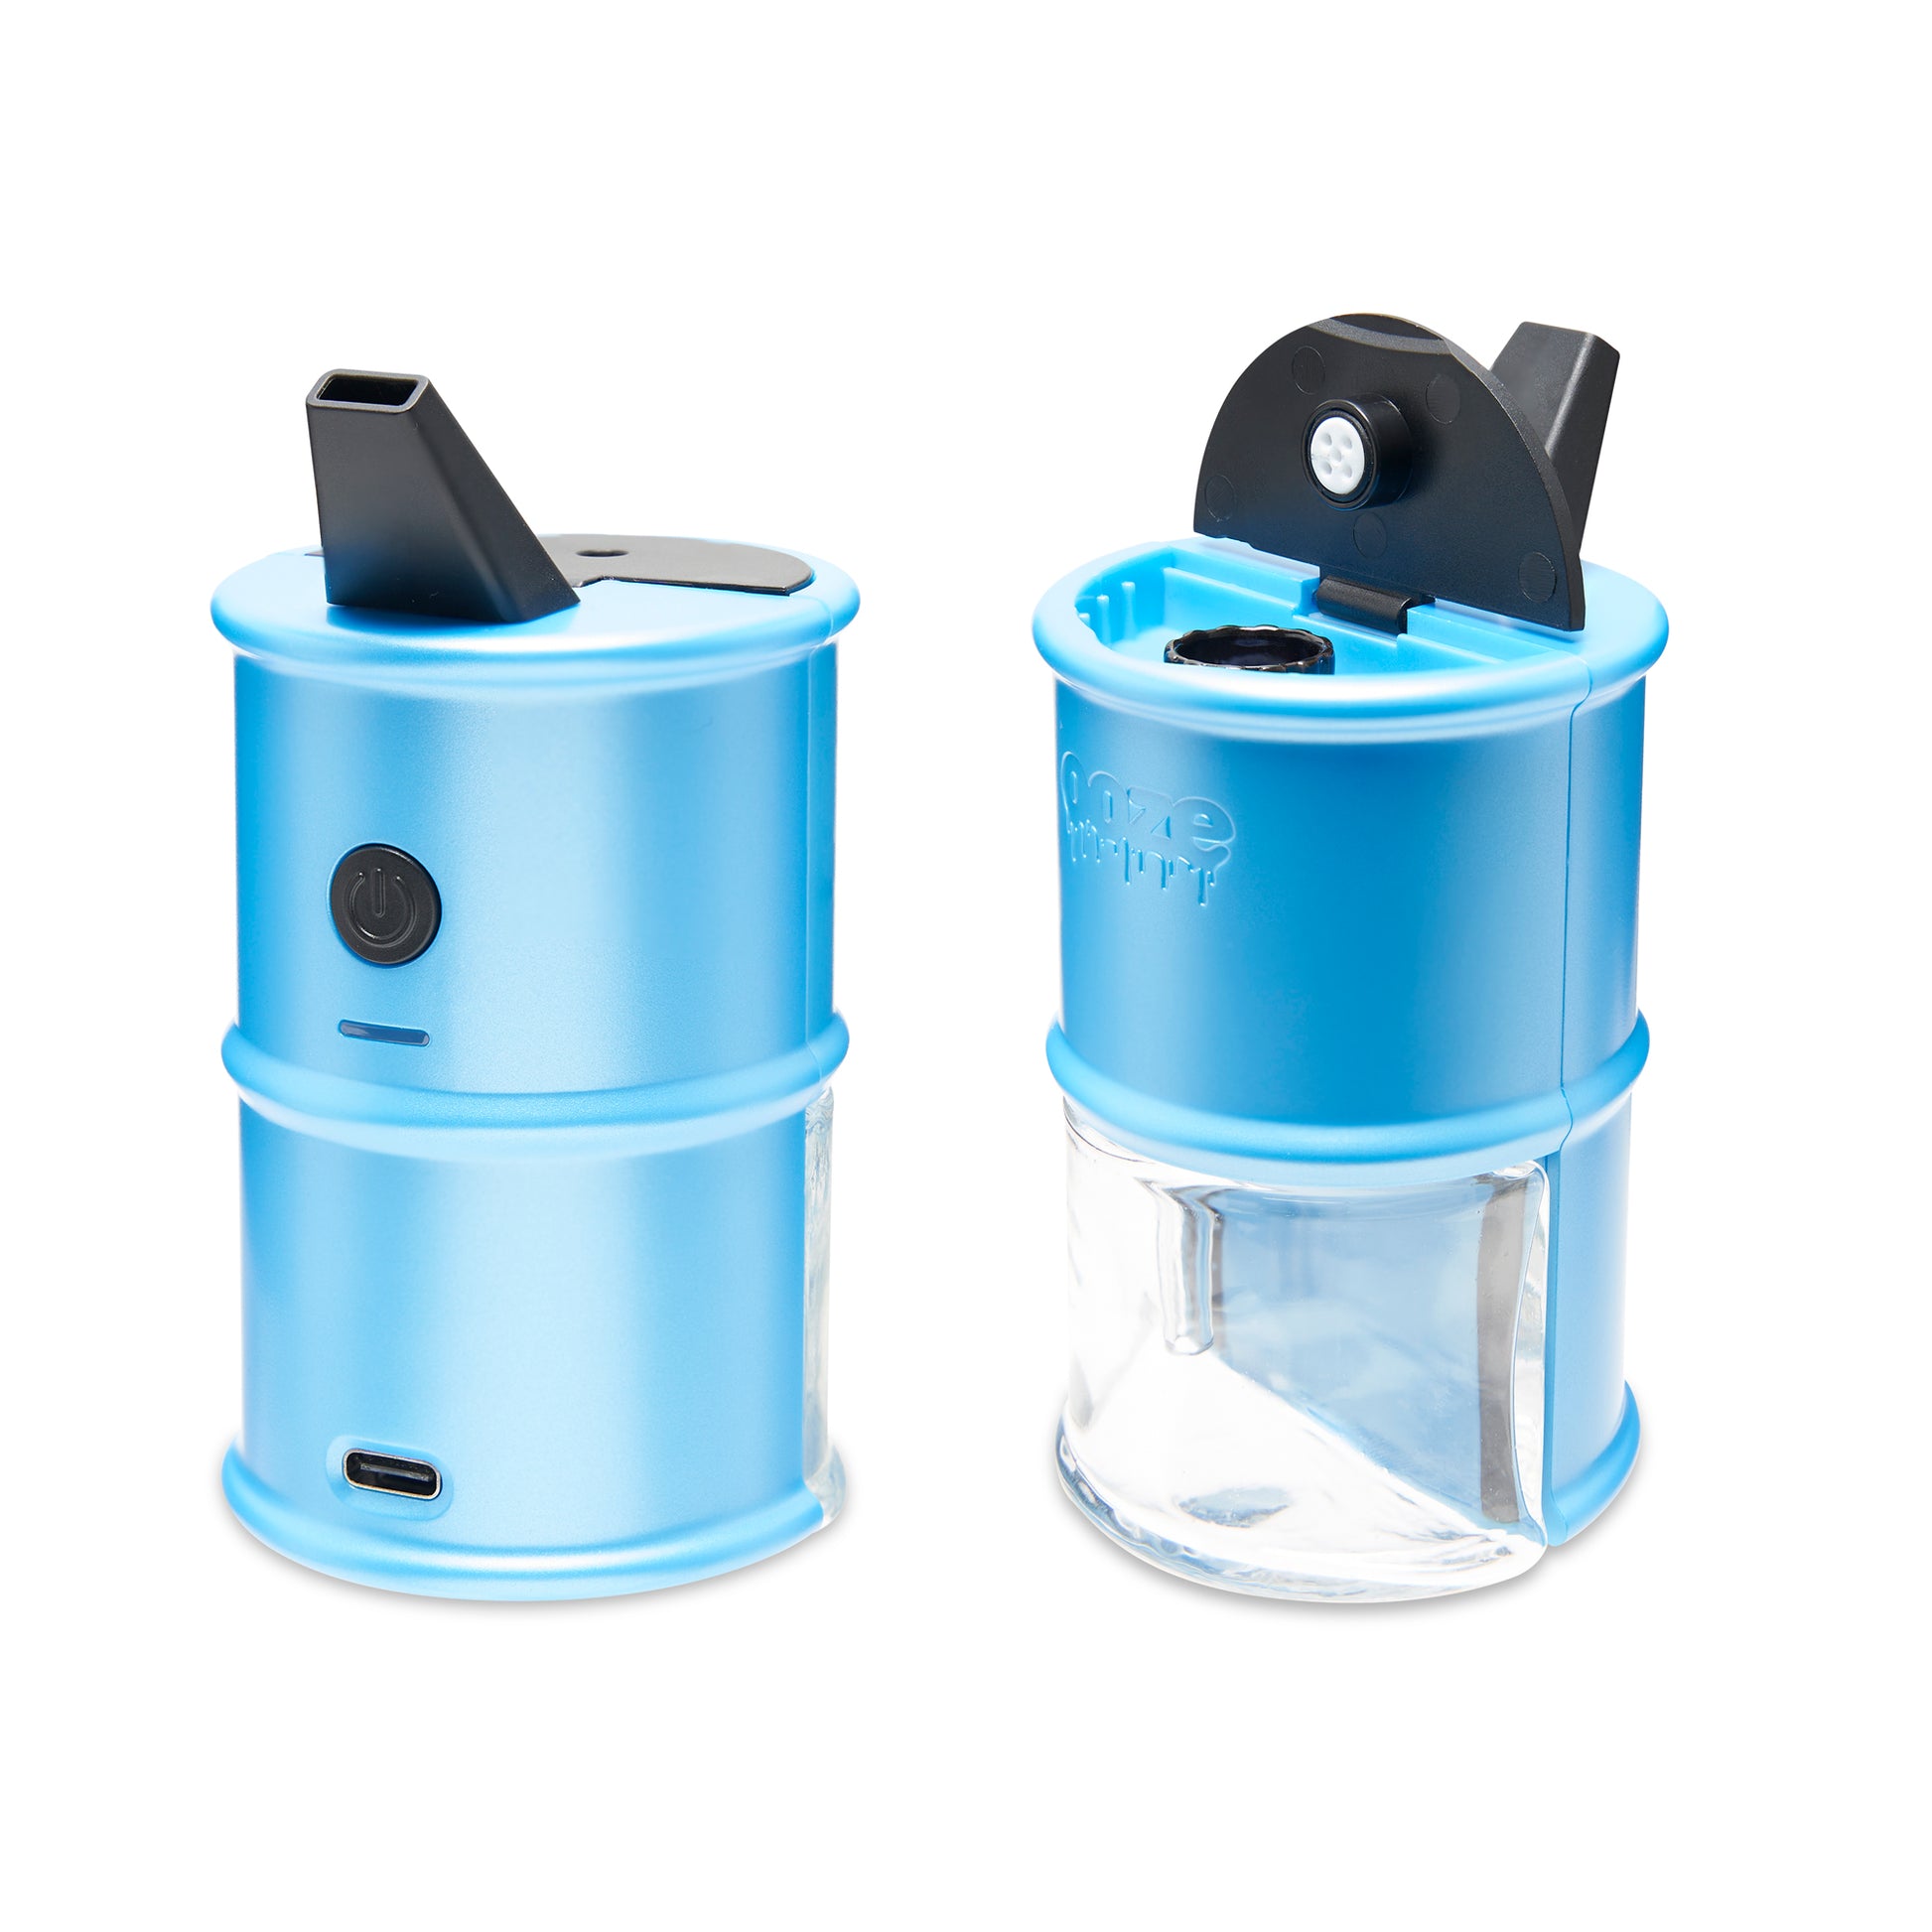 Two of the Arctic Blue Ooze Electro Barrel E-Rigs are shown side by side to show the front and back. The left side shows the back with the button visible, and the right shows the front with the water chamber shown and lid open.